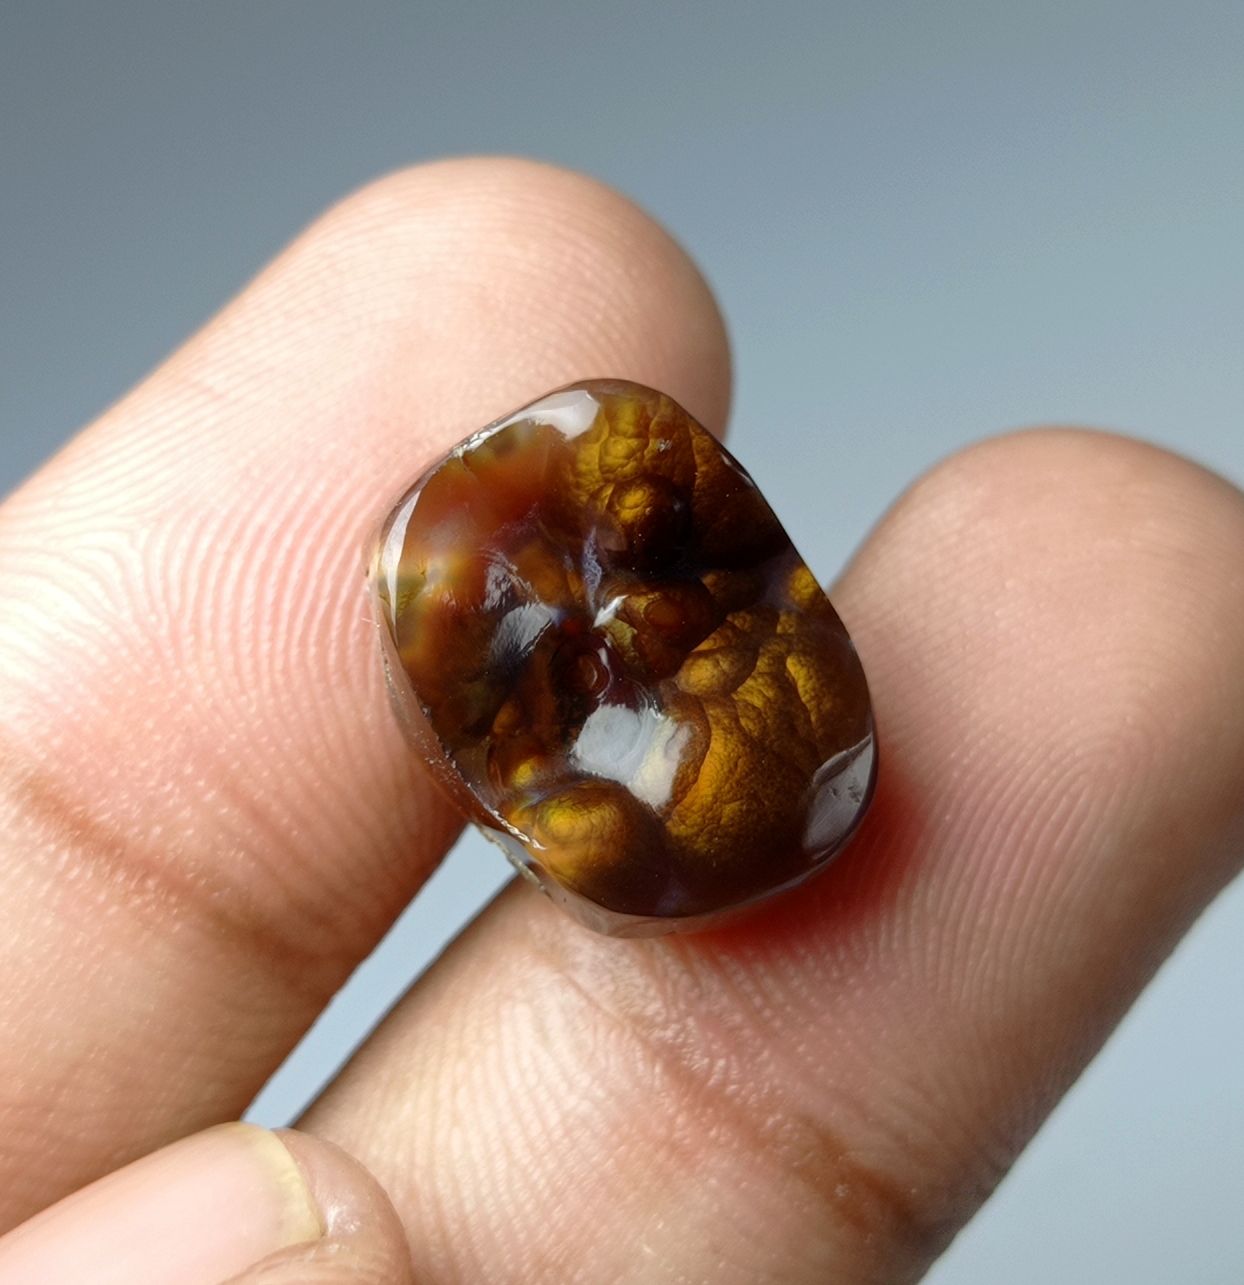 13.1ct Natural Carved Fire Agate, Dimensions 17x13x7mm